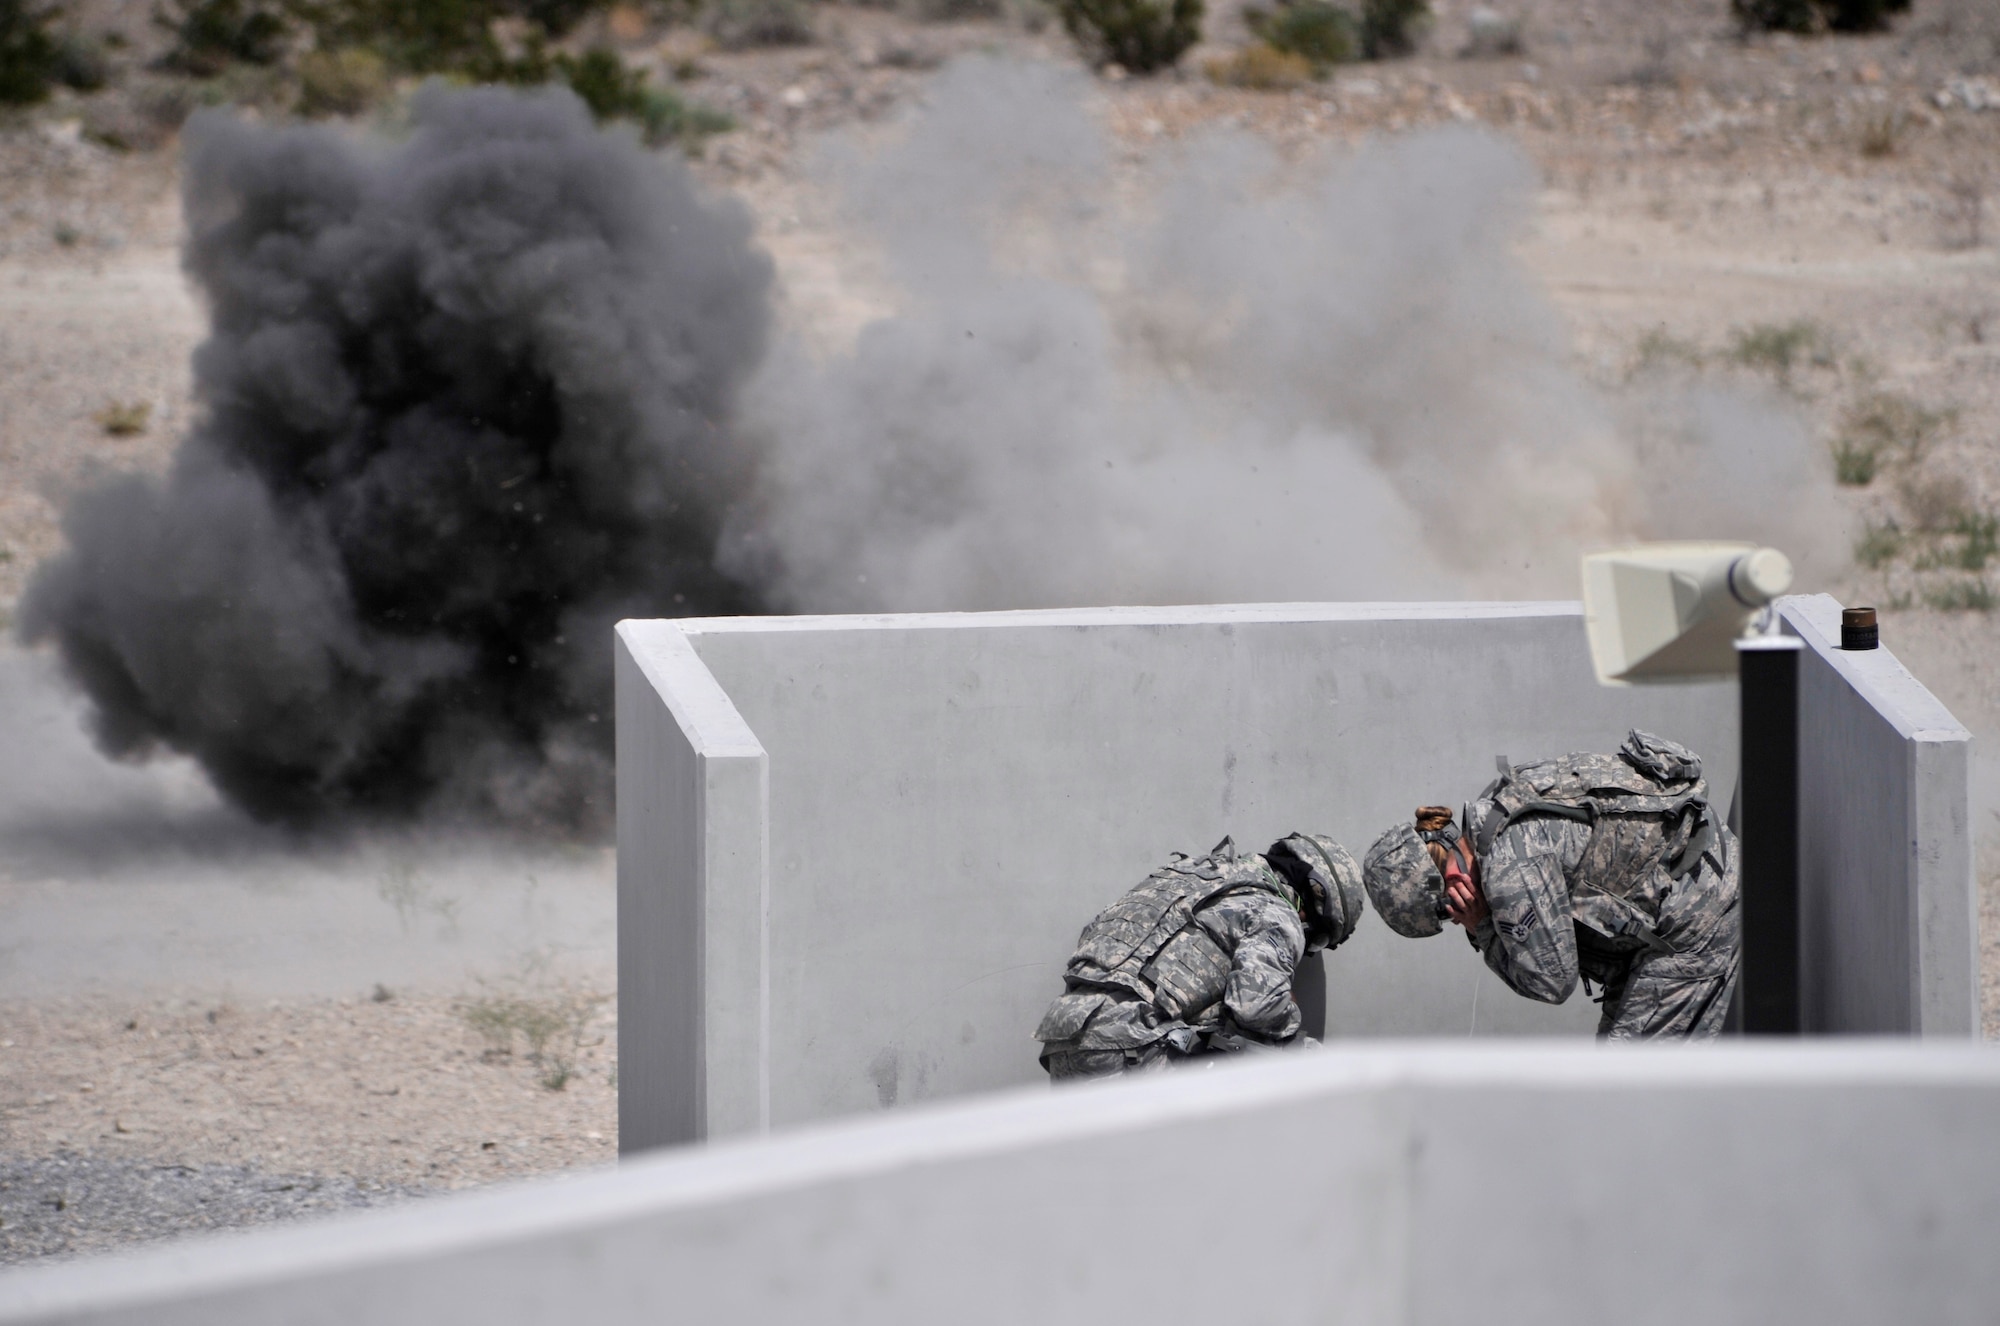 A student and instructor assigned to the 99th Ground Combat Training Squadron take cover behind a barrier during the last iteration of the M-67 fragmentation grenade training course Aug. 30, 2014, at Silver Flag Alpha, Nevada. The course has taken place at Silver Flag since 2011 and will be consolidated with the U.S. Army next year at Fort Bliss, Texas. (U.S. Air Force photo by Airman 1st Class Christian Clausen/Released)